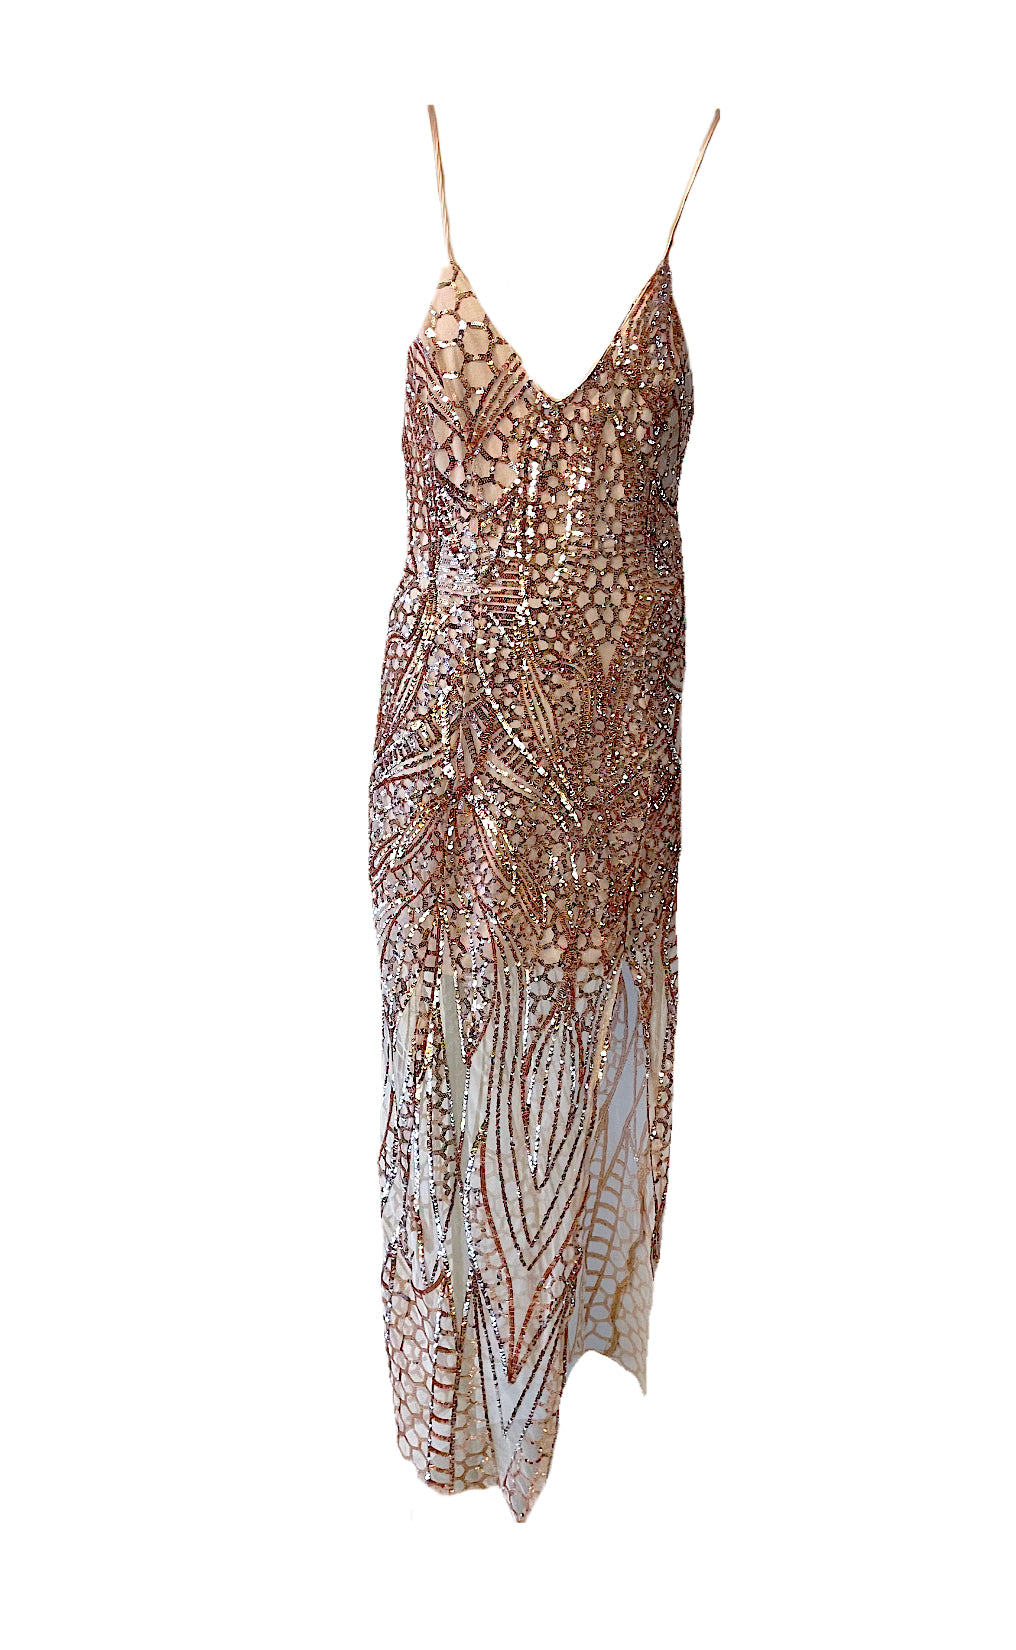 Showpo's rose gold sequin dress is the perfect mid length formal cocktail dress. Its silhouette is designed to flatter any body type, while its sequins catch the light and shine, providing a subtle sparkle to your look. Constructed from quality sequin fabric, this dress is designed to last. Add some class to any occasion with this stylish, timeless piece. Australian dress shop affordable dress